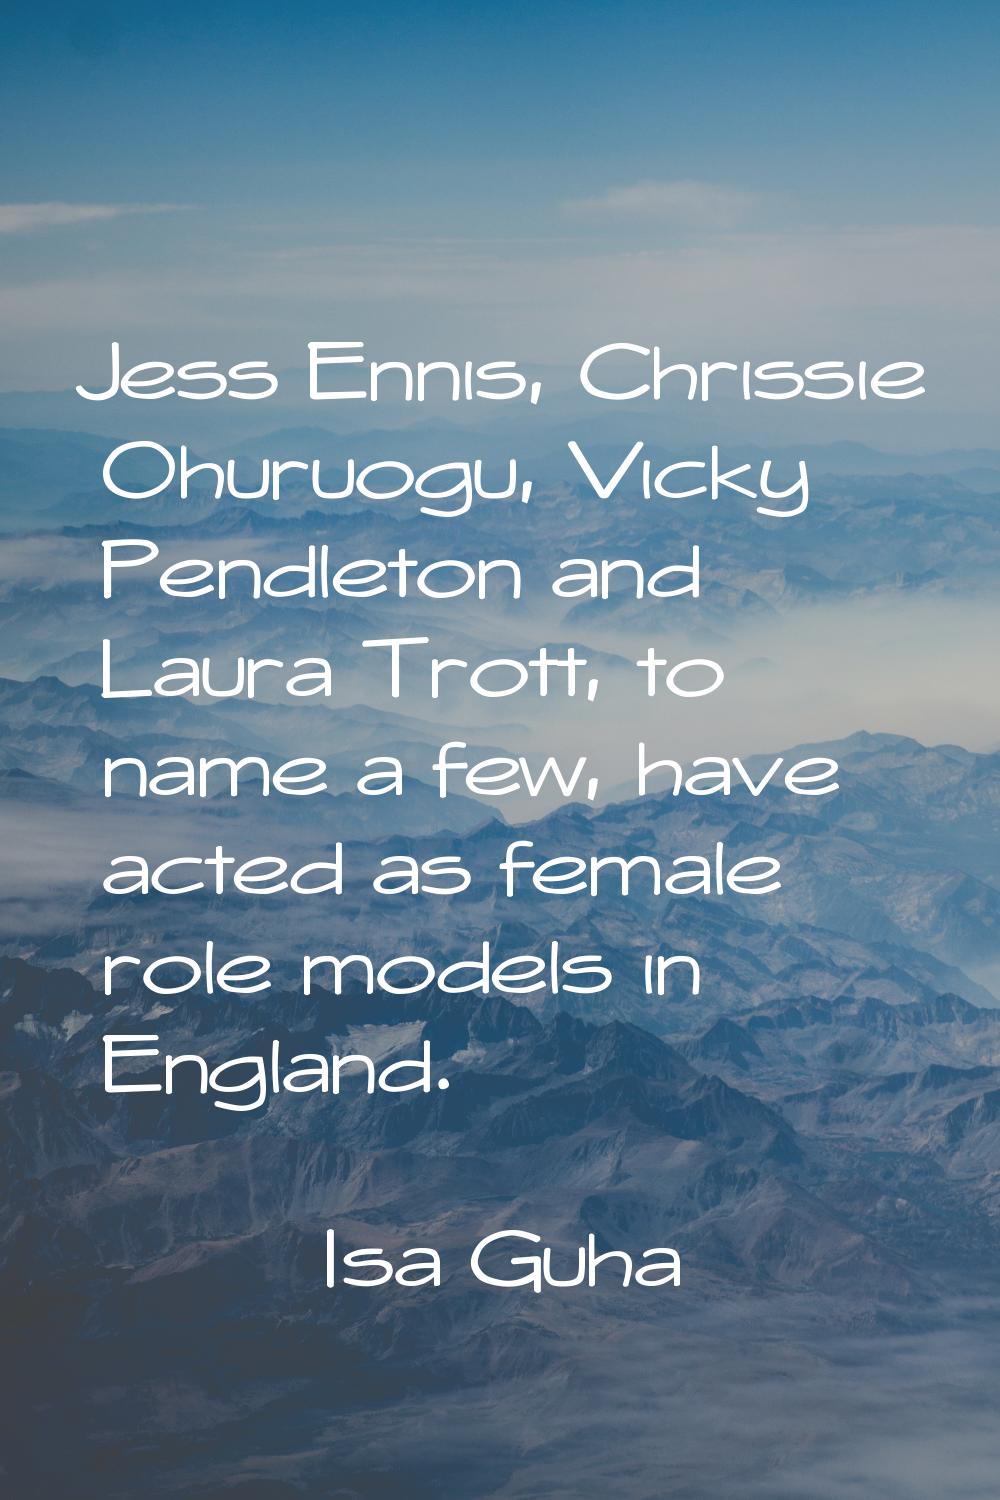 Jess Ennis, Chrissie Ohuruogu, Vicky Pendleton and Laura Trott, to name a few, have acted as female